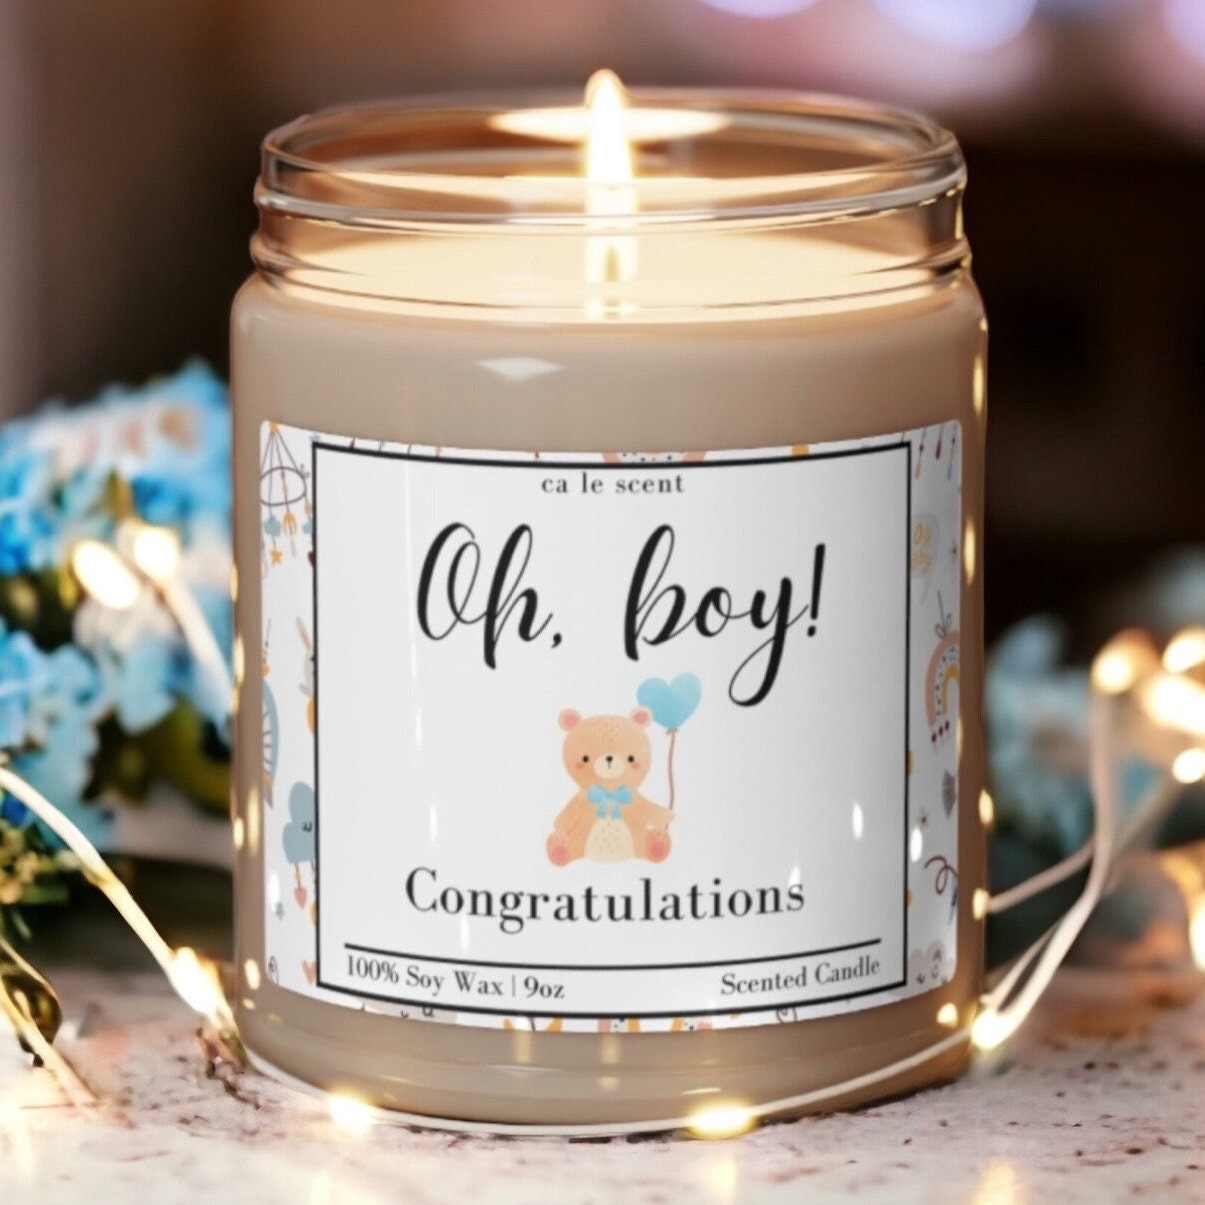 BOY MOM CANDLE – THE REBIRTH OF THE PRINCESS